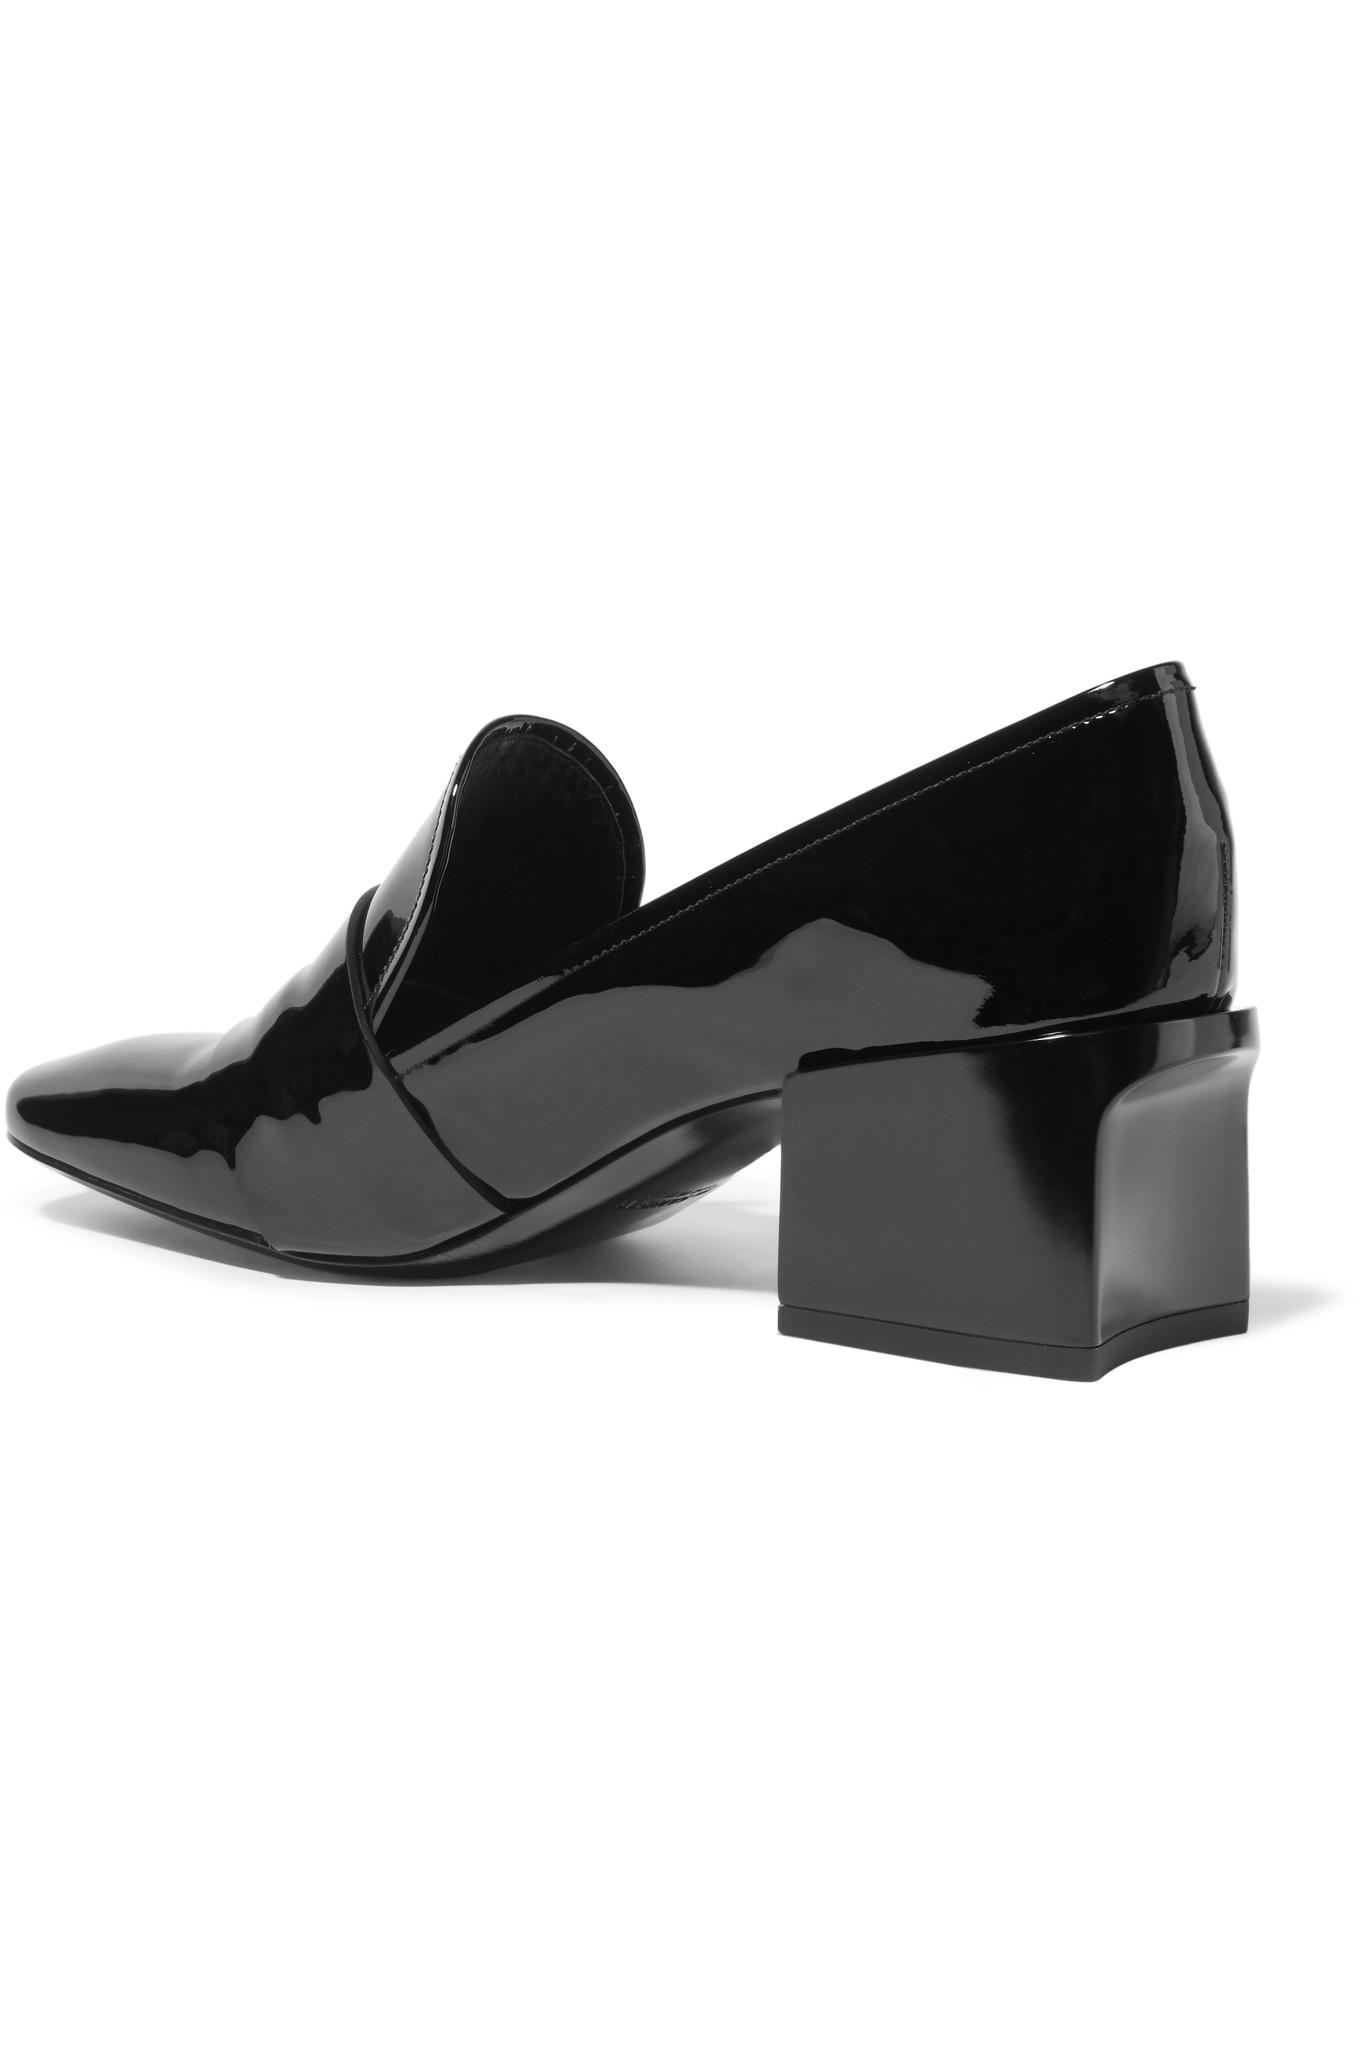 Lyst - Jil Sander Buckled Patent-leather Loafers in Black